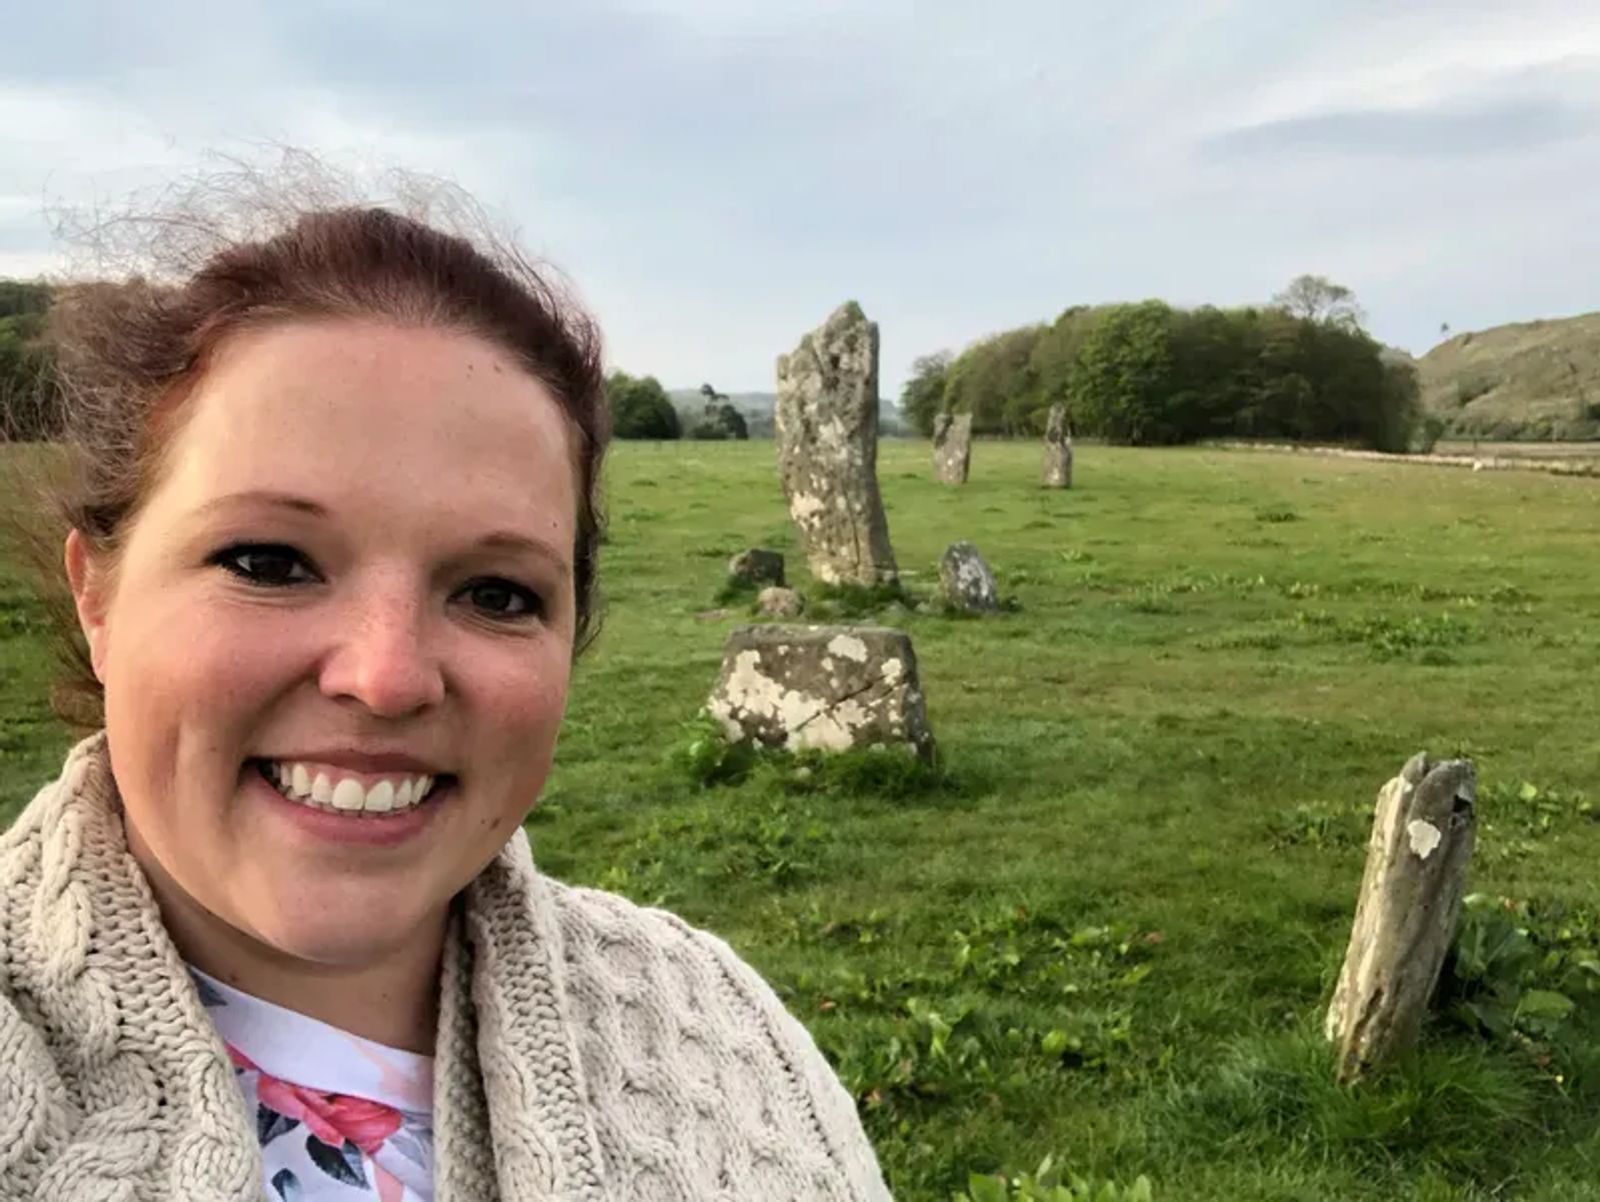 Cairns and Standing Stones, Mystery of Scotland's Past